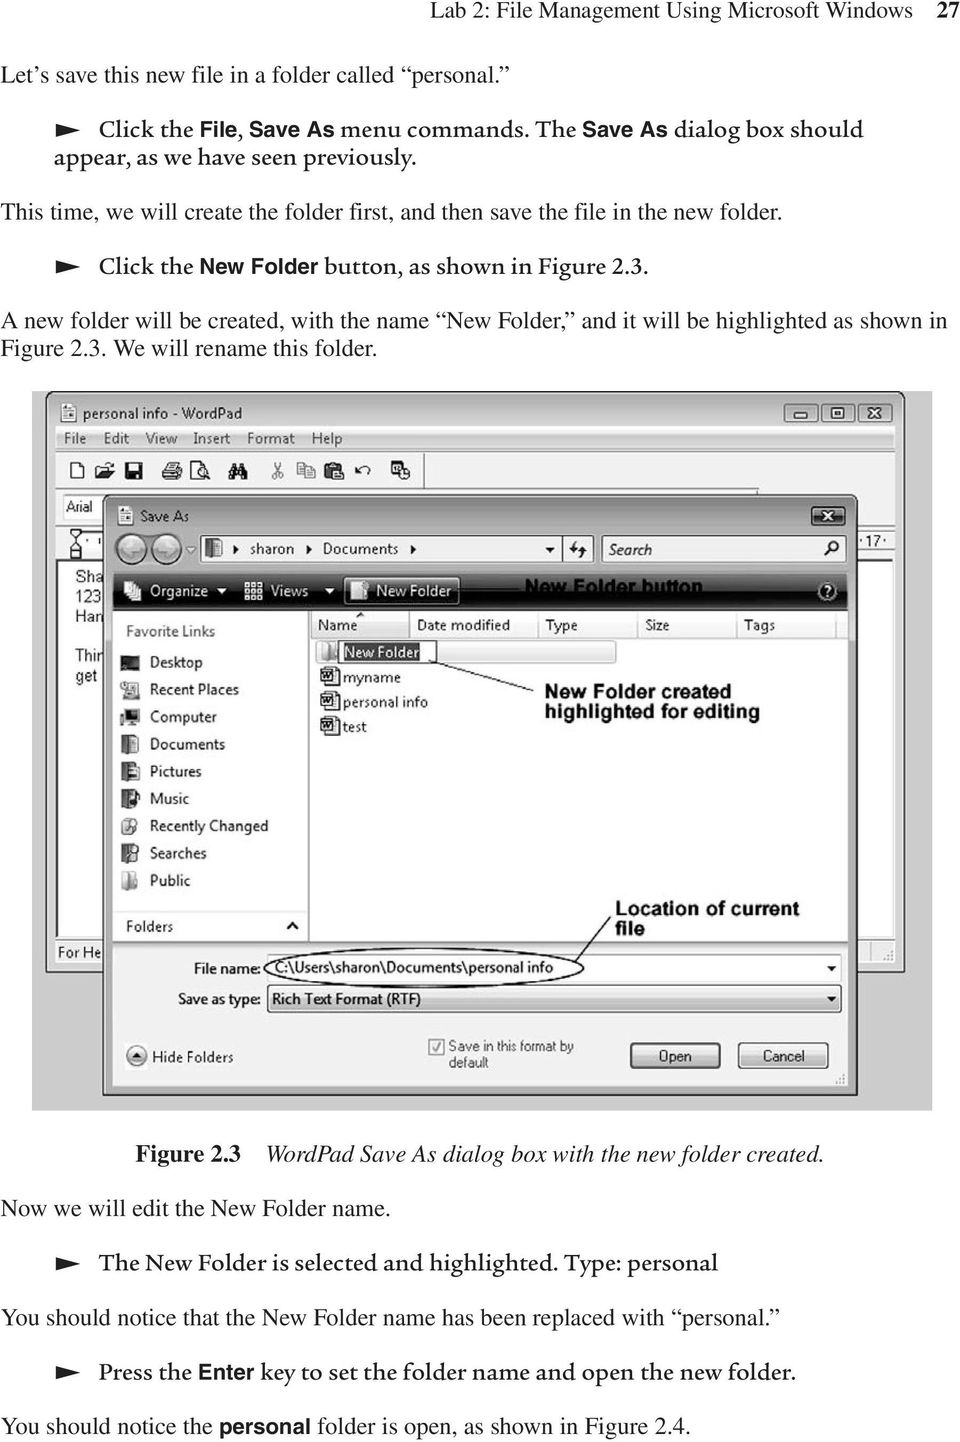 Lab 2: File Management Using Microsoft Windows 27 A new folder will be created, with the name New Folder, and it will be highlighted as shown in Figure 2.